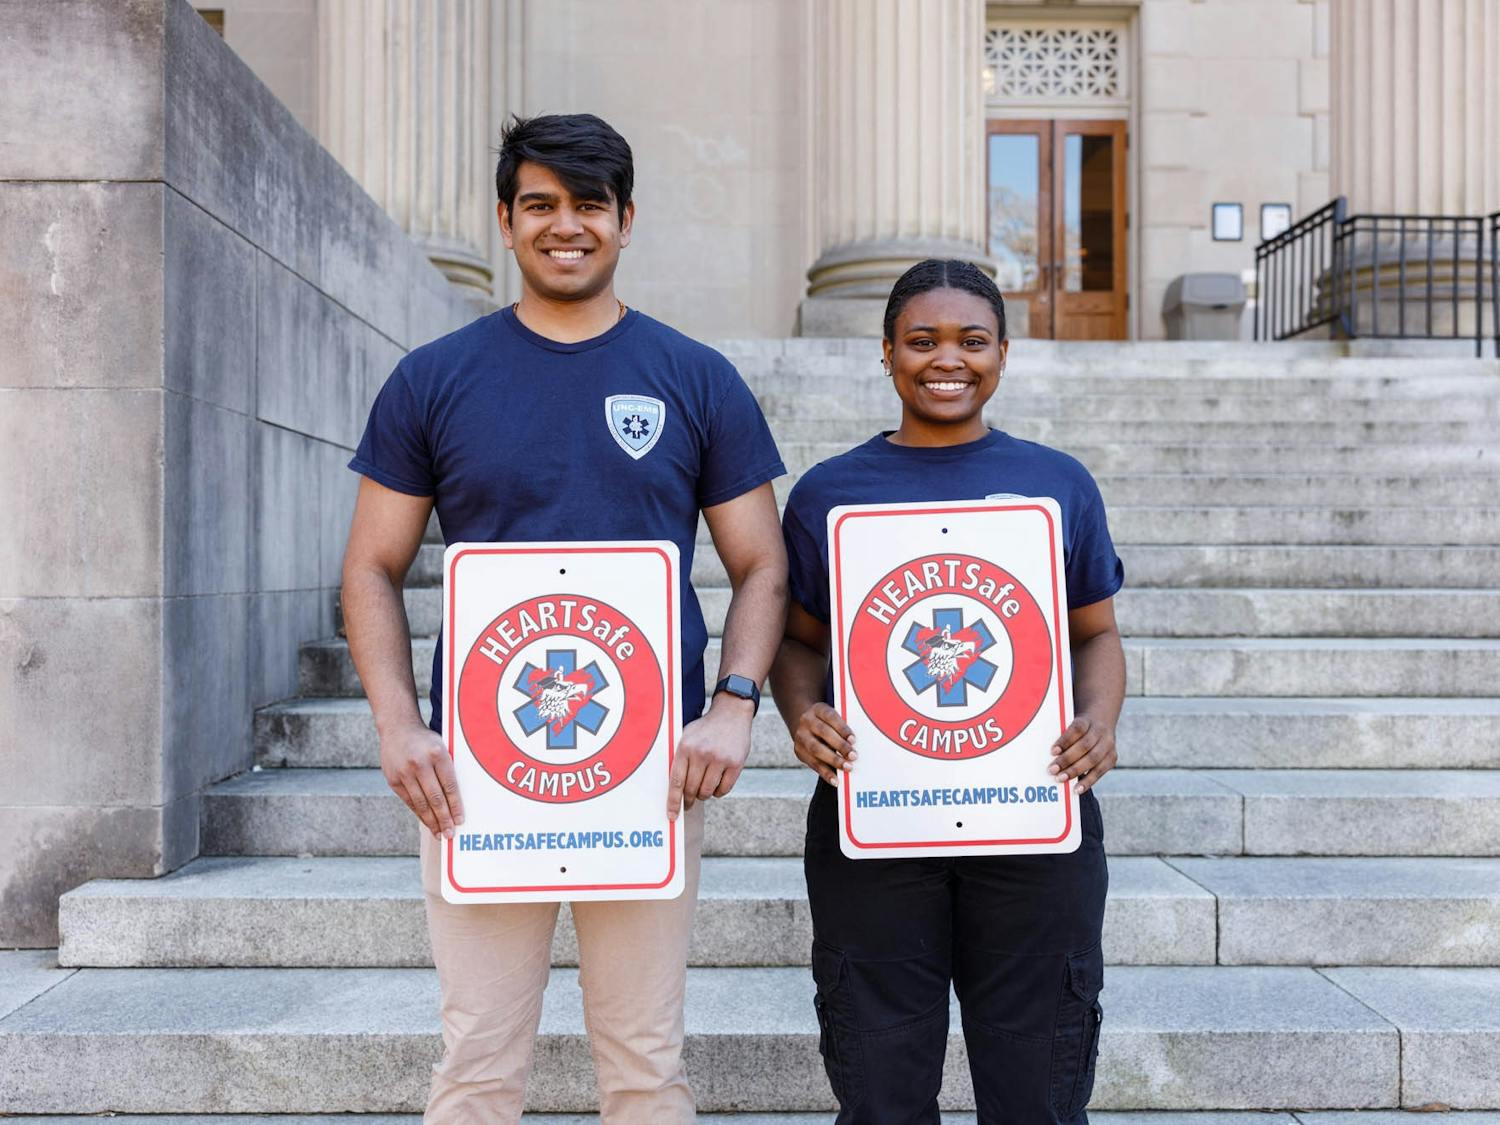 Advanced EMT Kirti Patel (left) and EMT Jayla Cobbs (right), who led the effort in getting UNC's HEARTSafe Campus accreditation, pictured holding up signs that will be put up around campus.